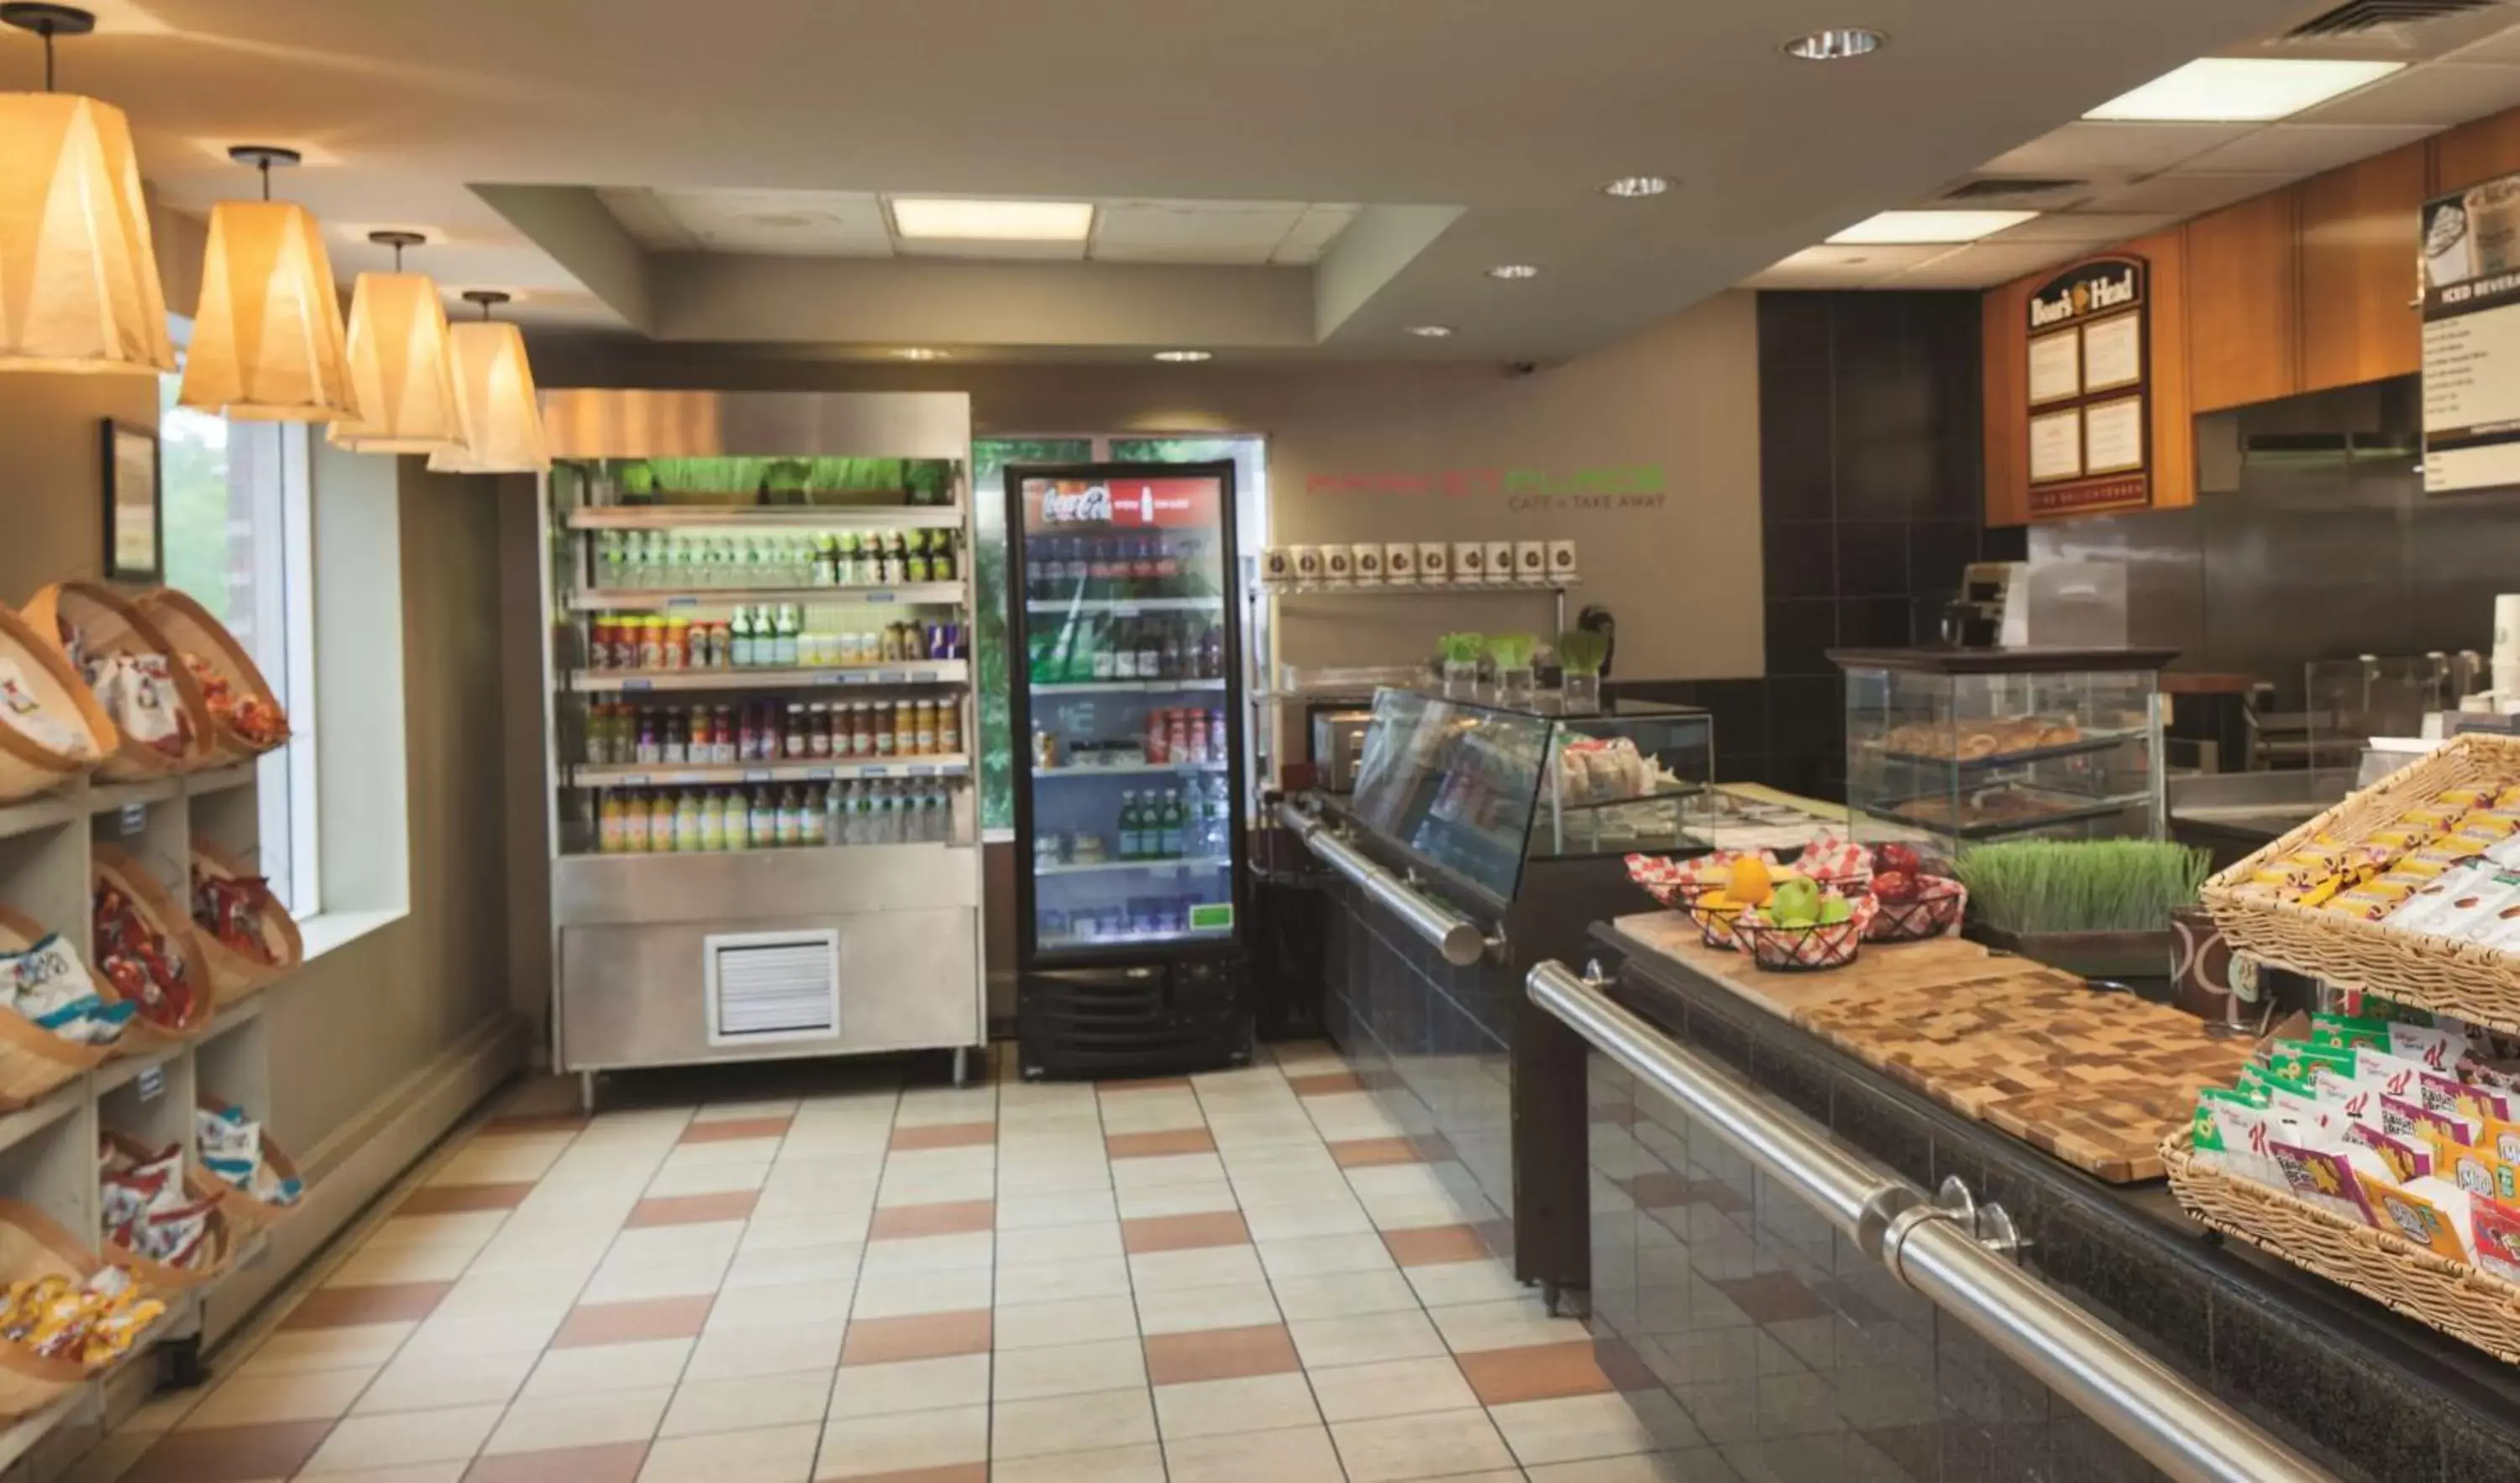 Restaurant/places to eat, Supermarket/Shops in DoubleTree by Hilton Hotel Boston Bayside